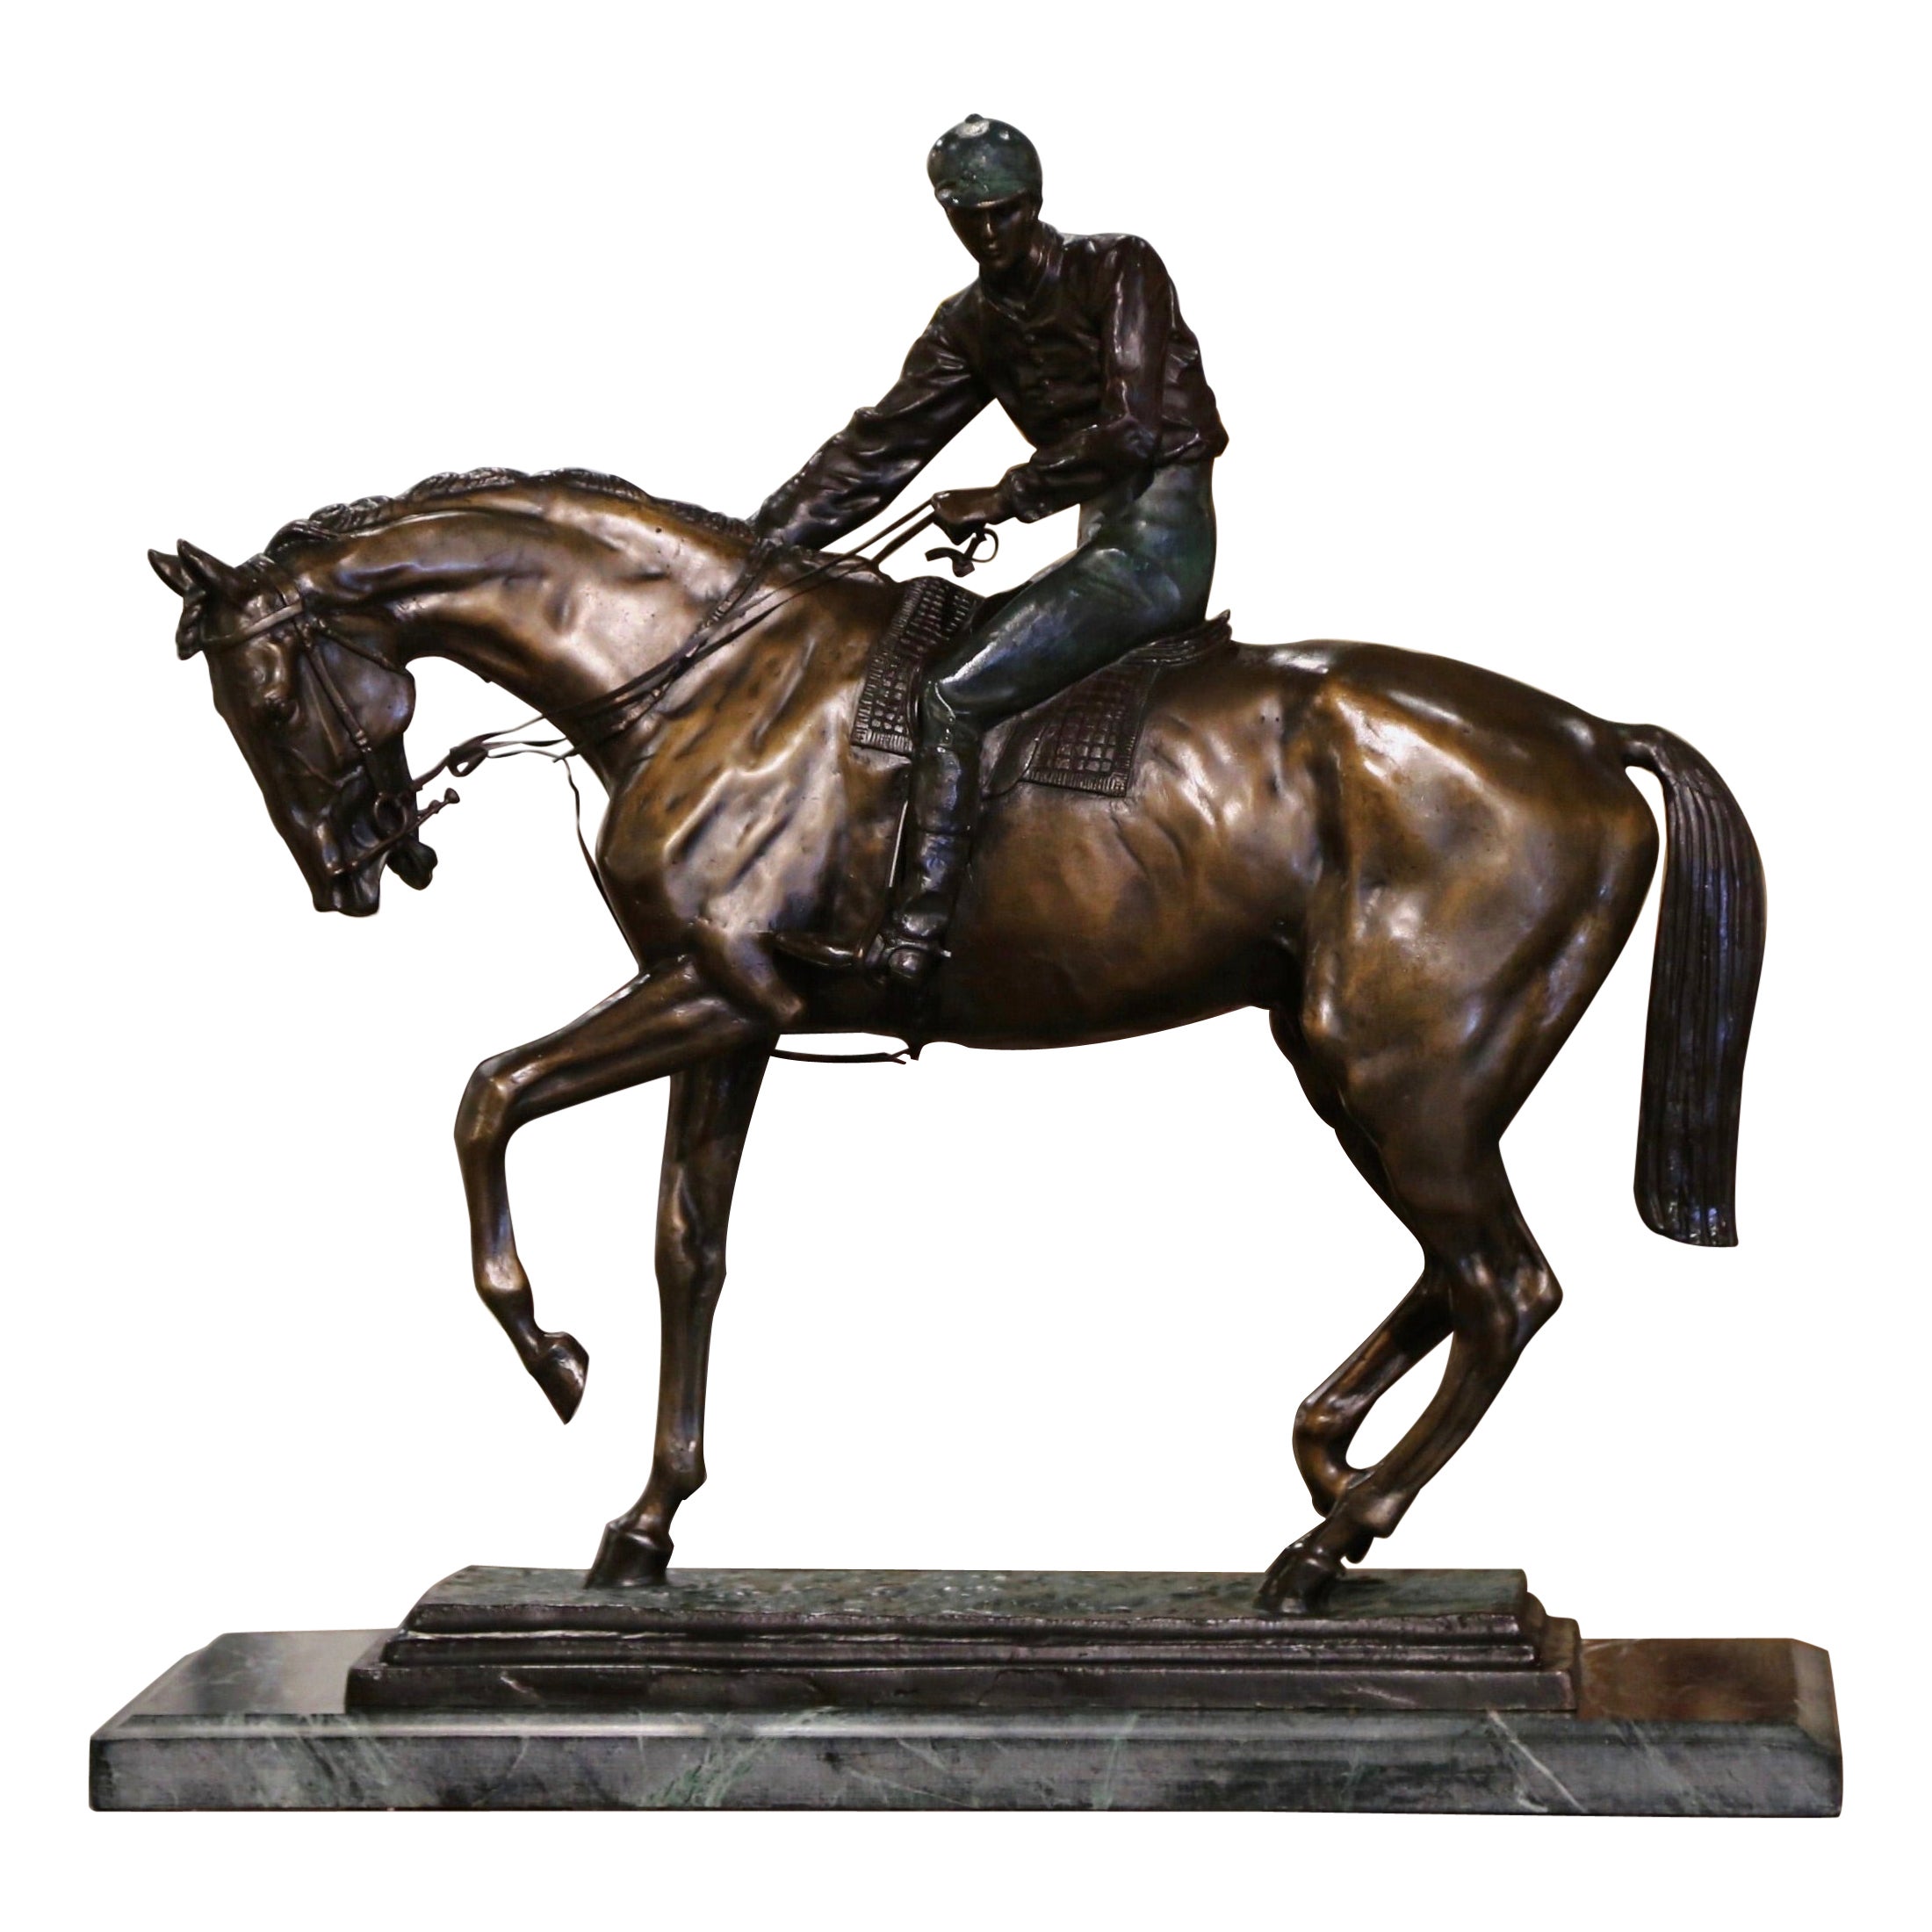 Late 19th Century French Bronze Sculpture "Le Grand Jockey" Signed I. Bonheur For Sale